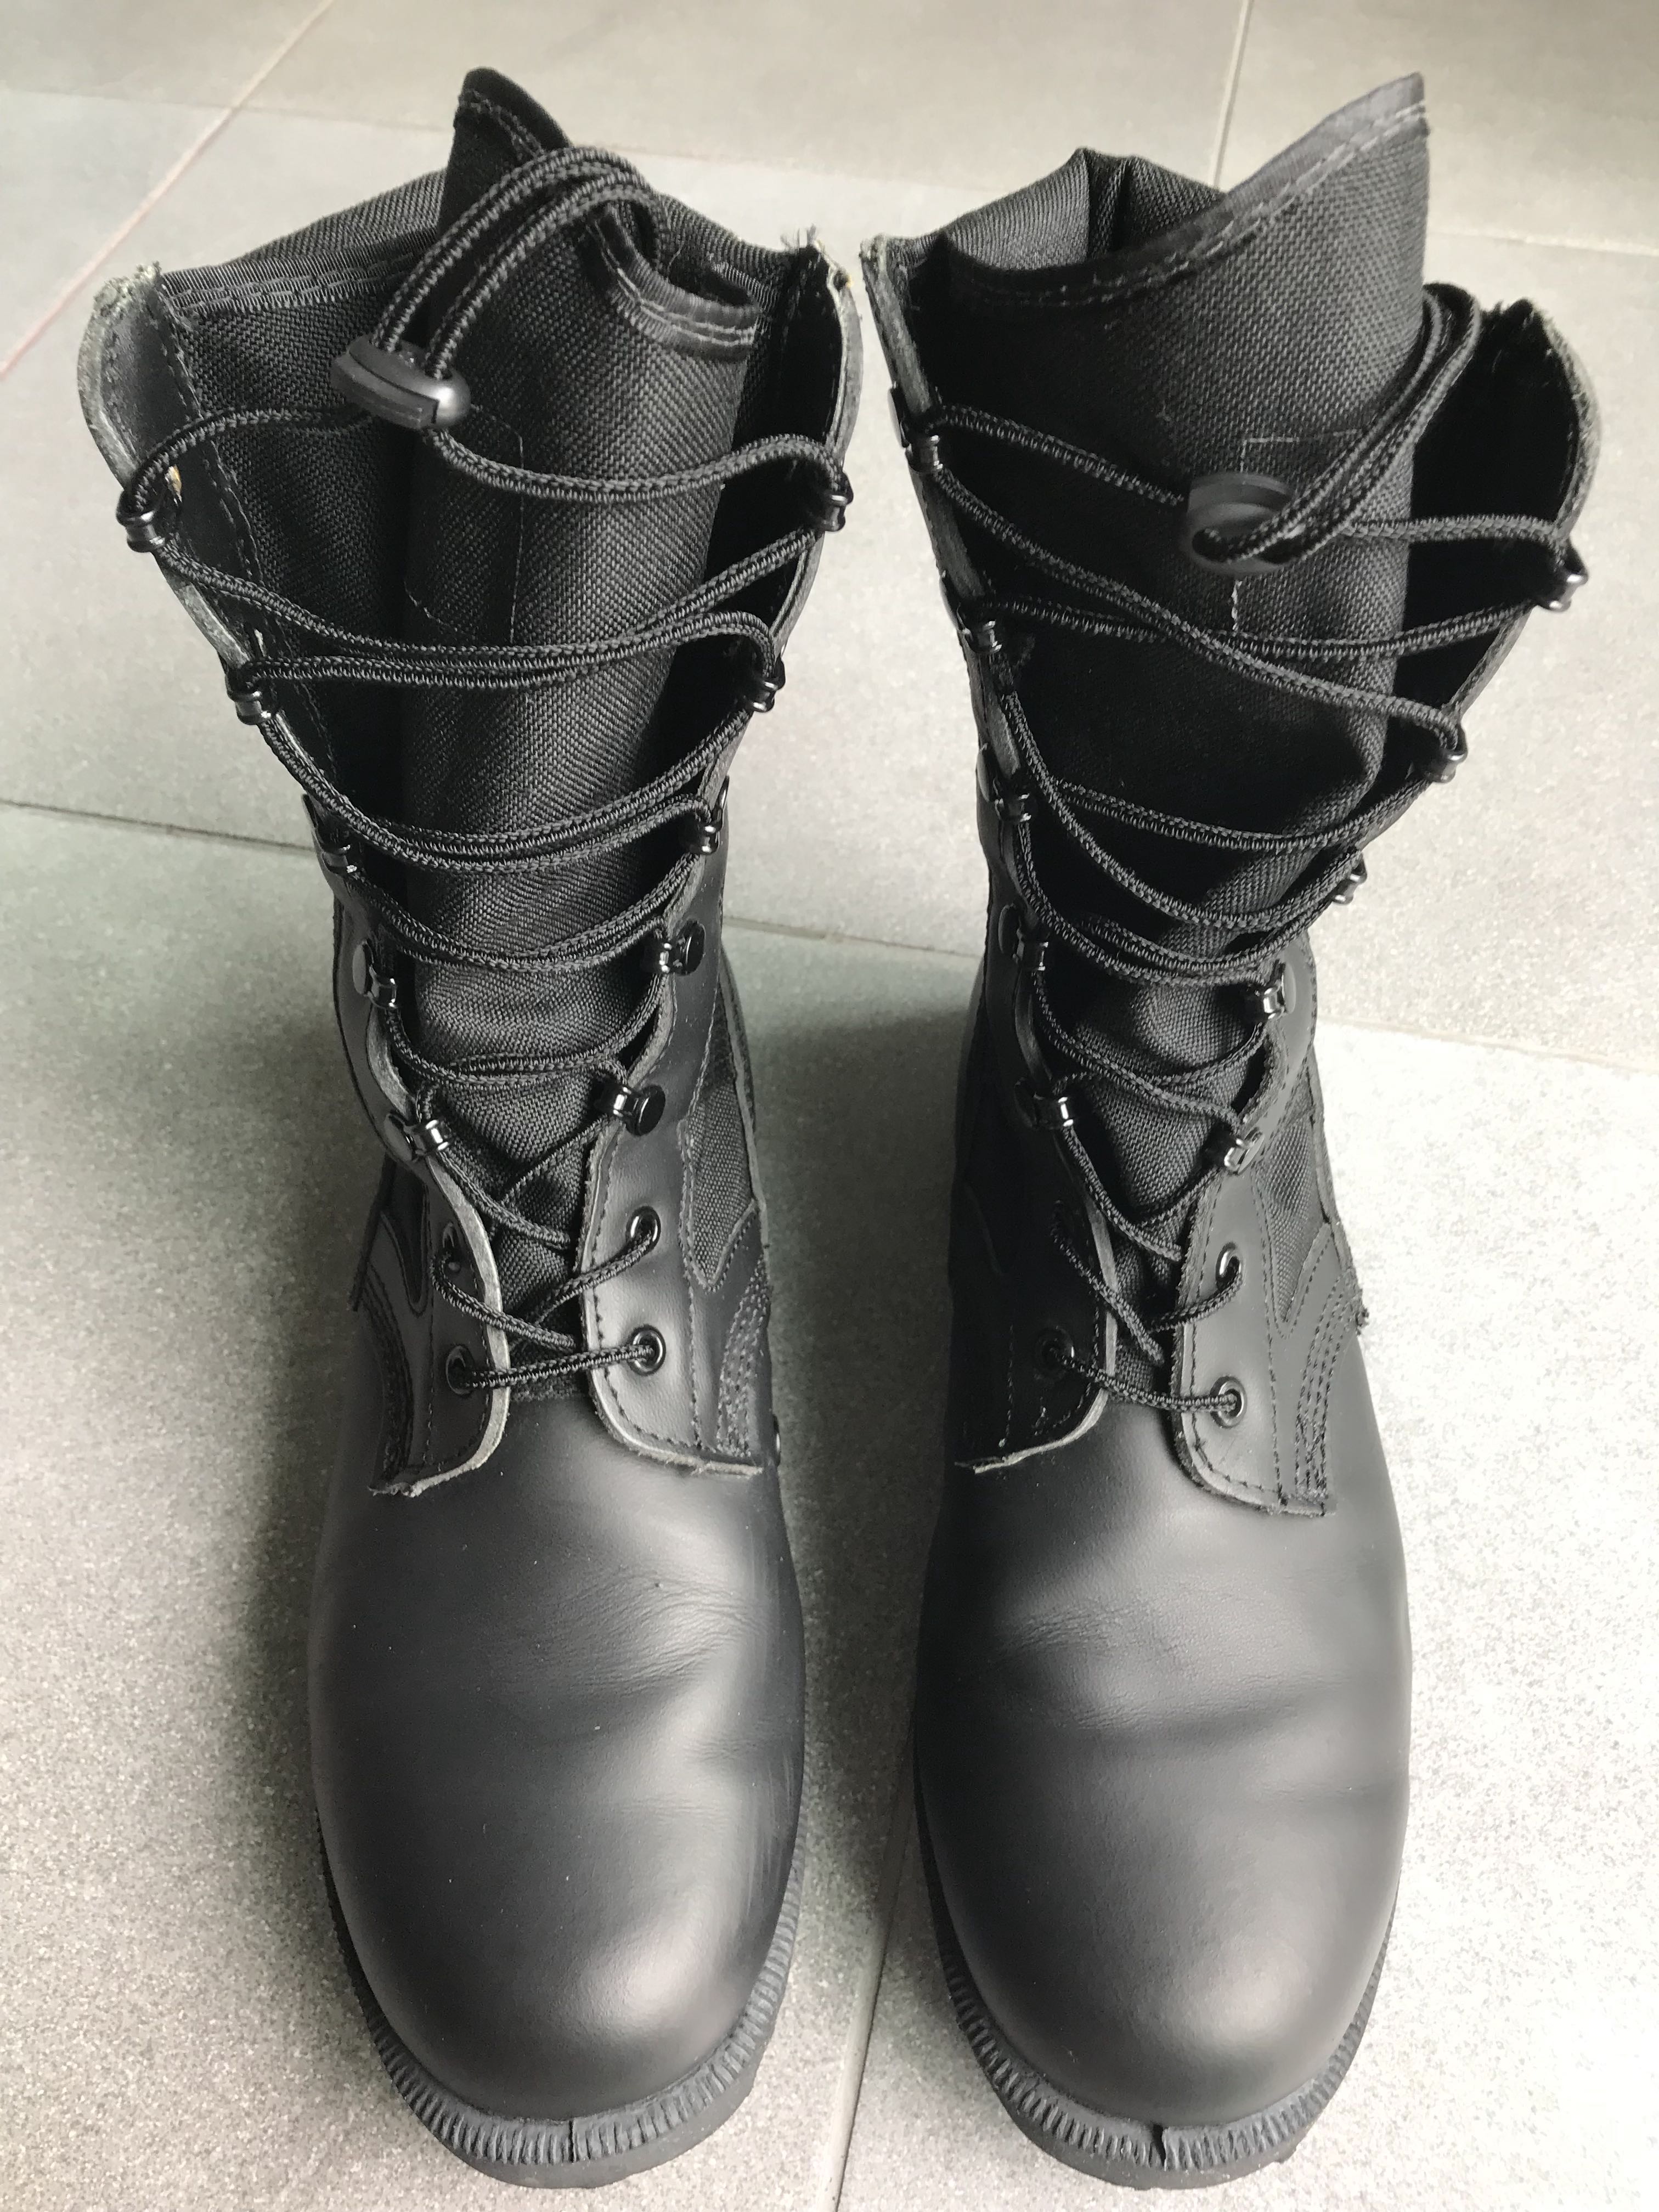 SAF Combat Boots (Wellco Peruana) Size US 8 - Only Worn A Few Times ...